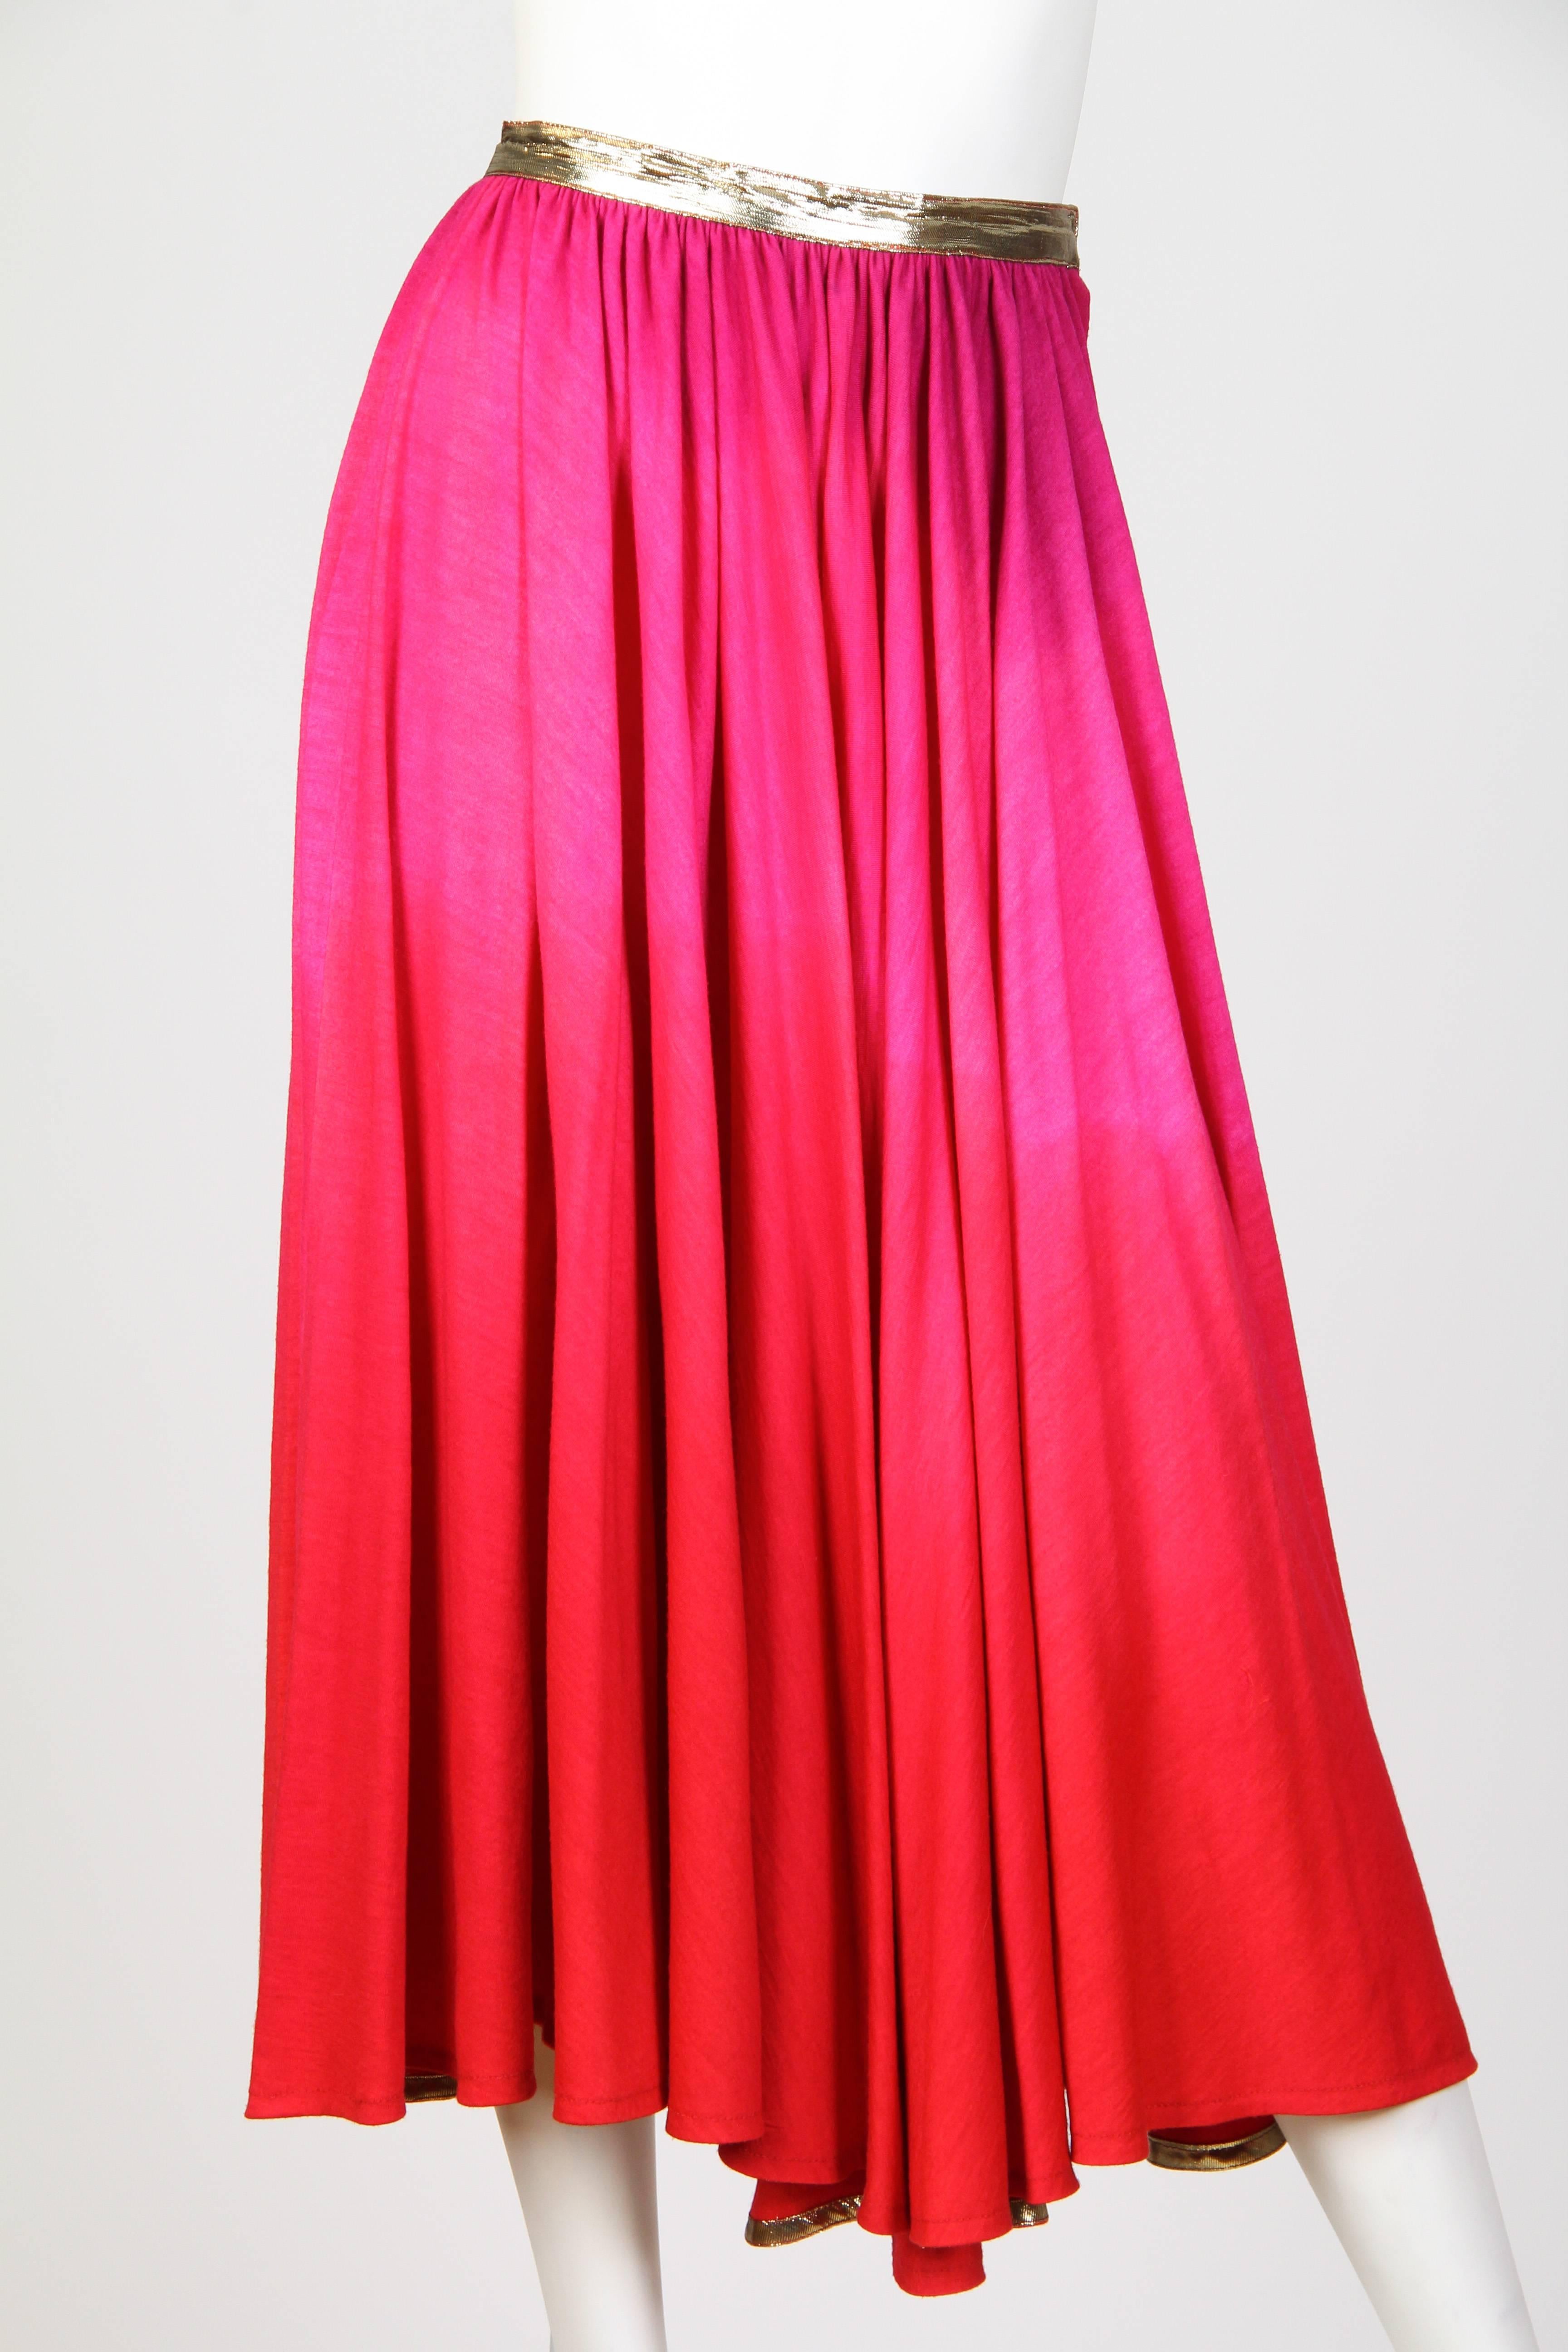 1970S GIORGIO SANT'angelo Pink & Purple Wool Jersey Ombré Dyed Halter Top Skirt For Sale 4